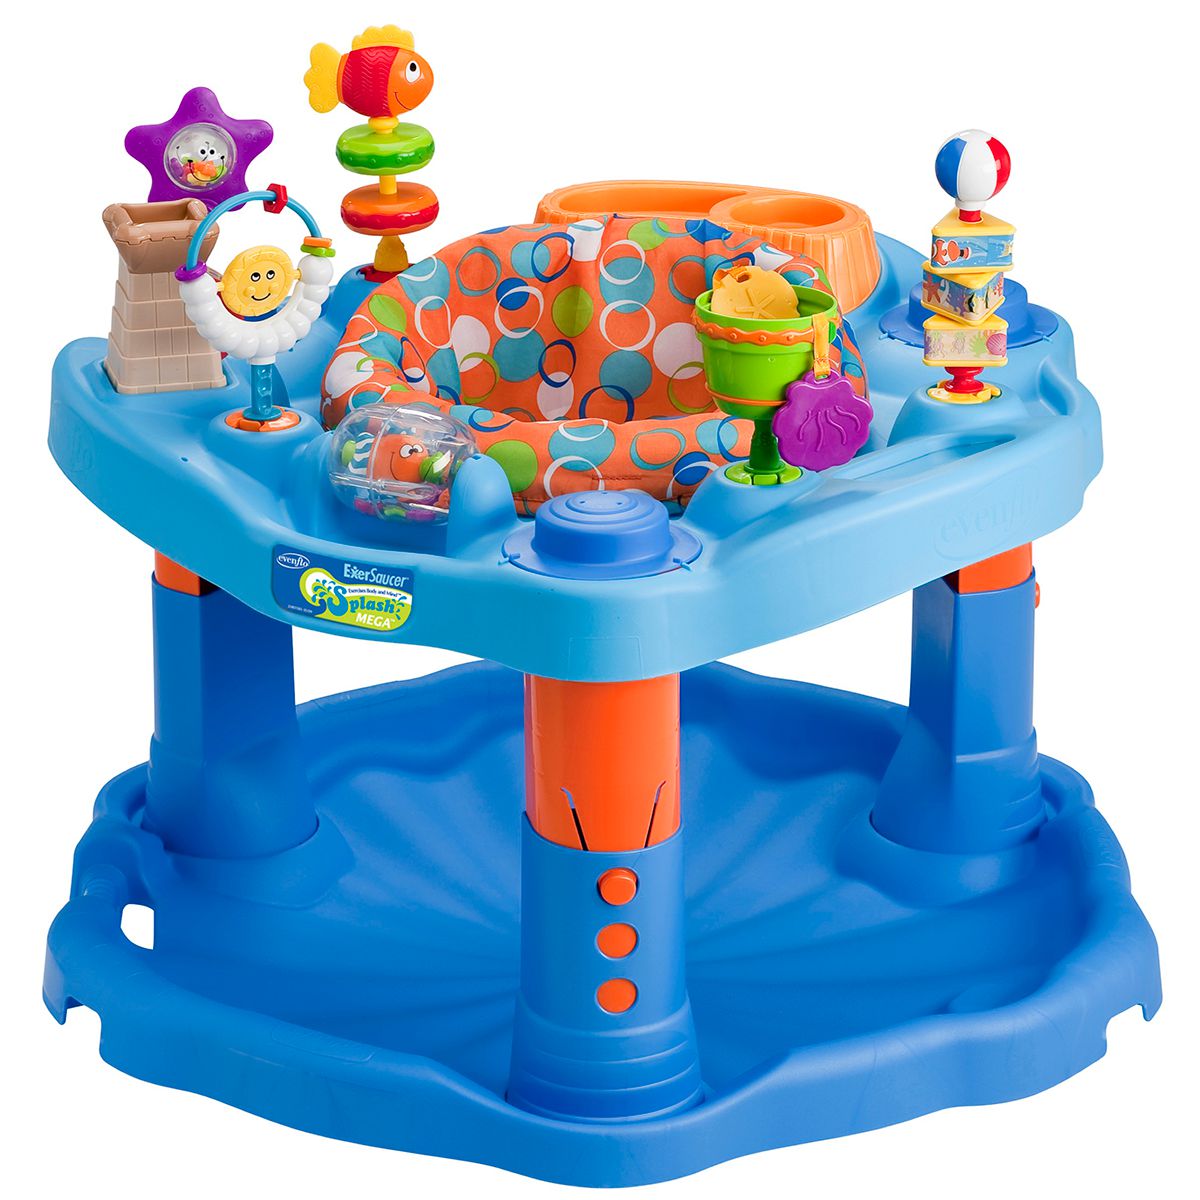 baby alive cook and care playset